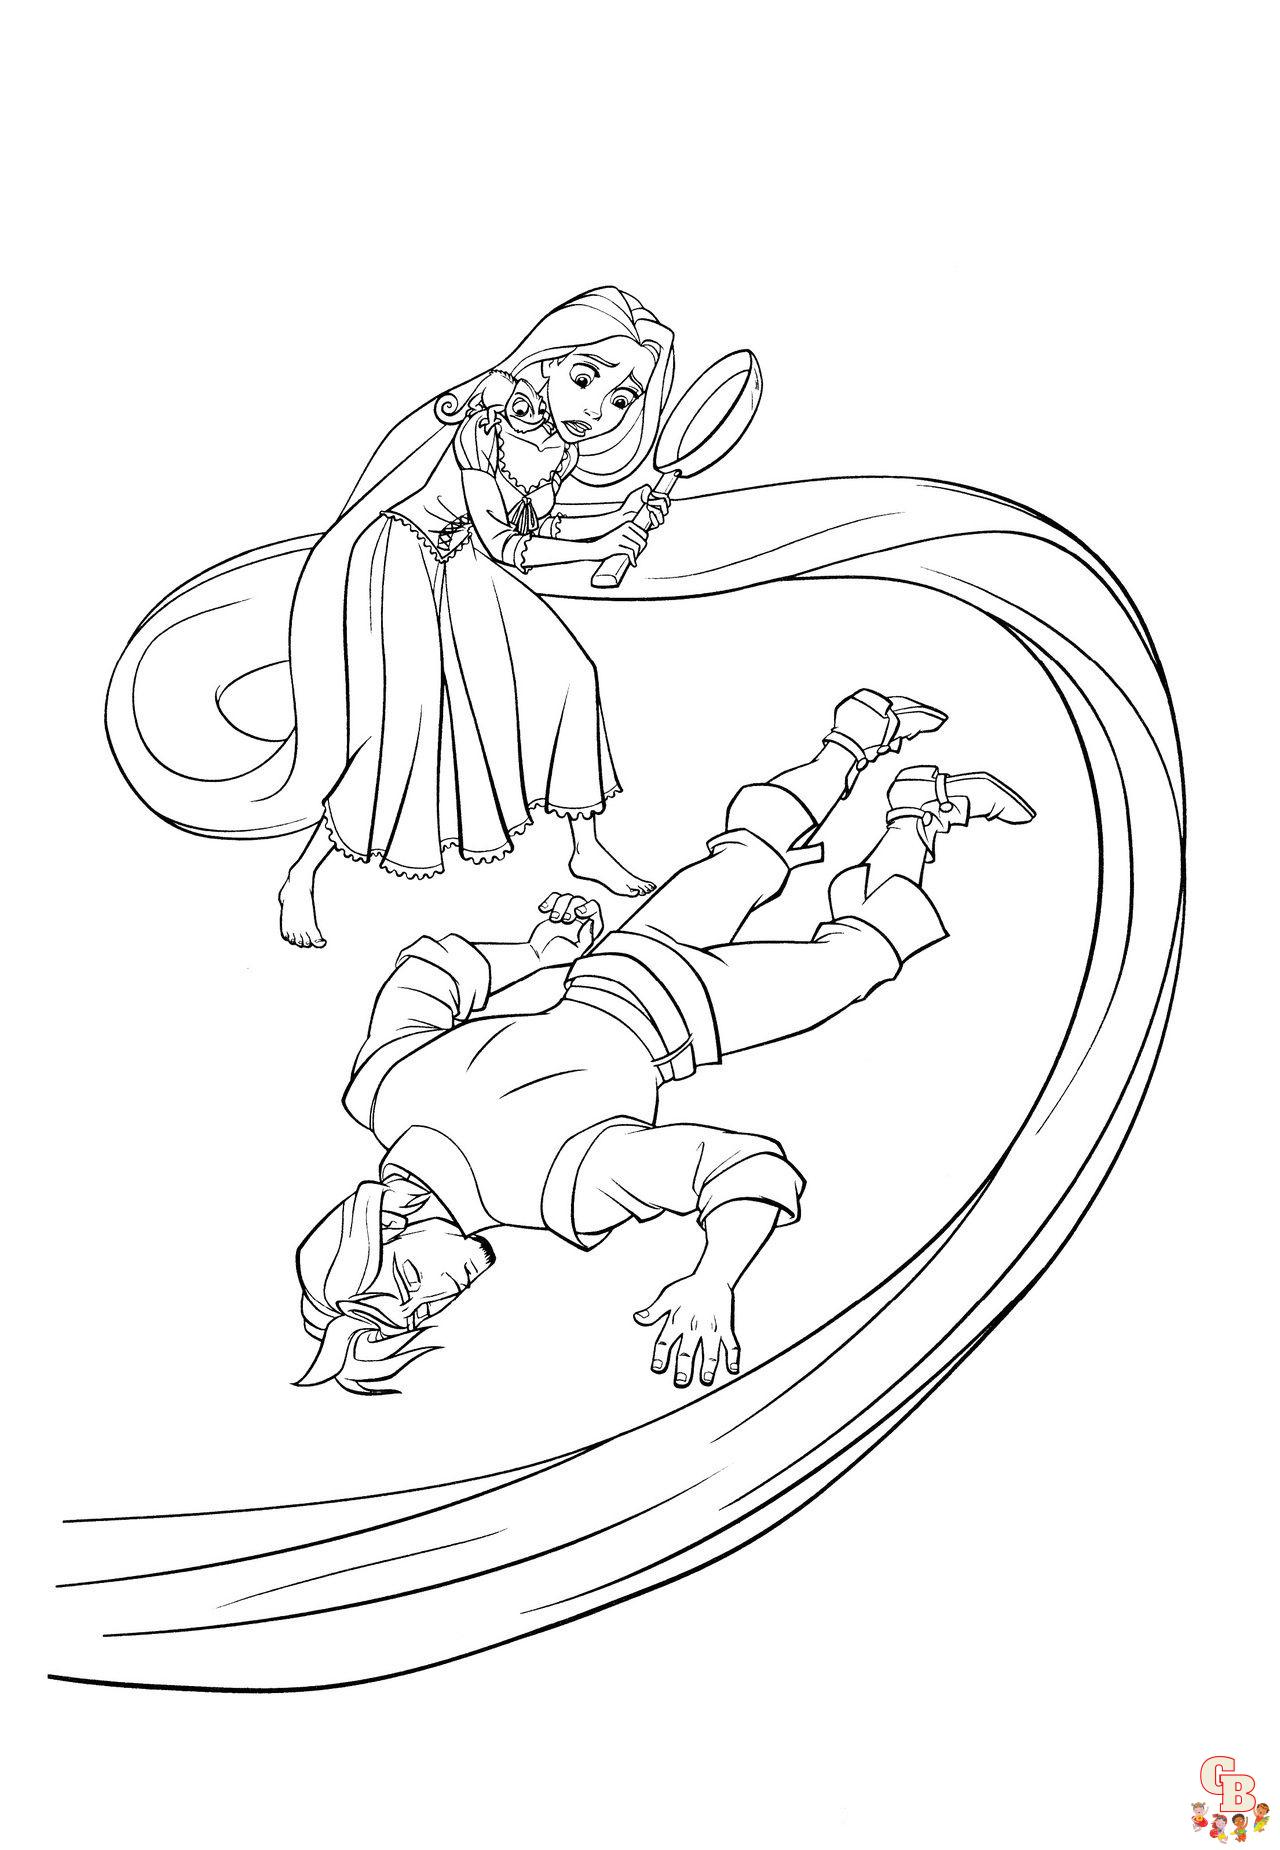 Flynn and Rapunzel Coloring Pages